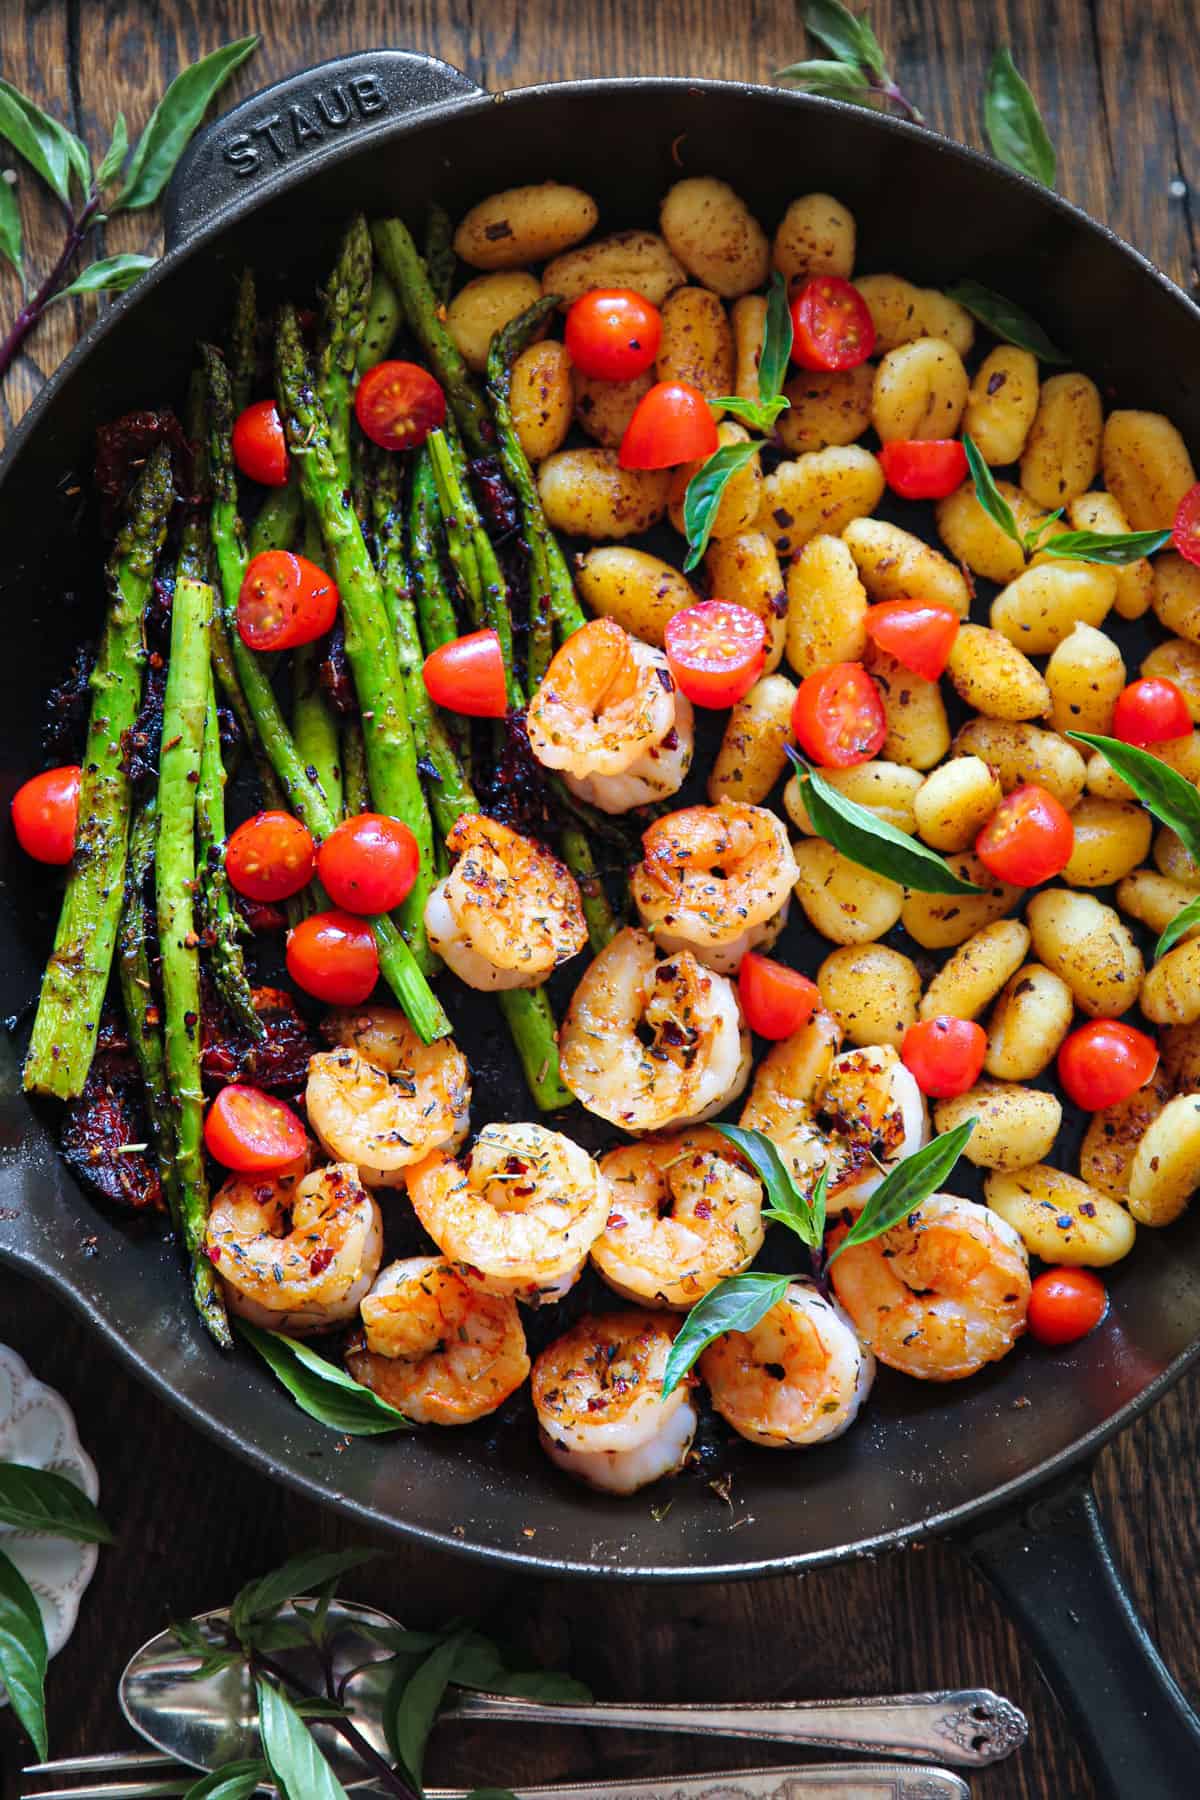 Shrimp Gnocchi with Asparagus, Sun-Dried Tomatoes, and Cherry Tomatoes - in a cast-iron skillet.